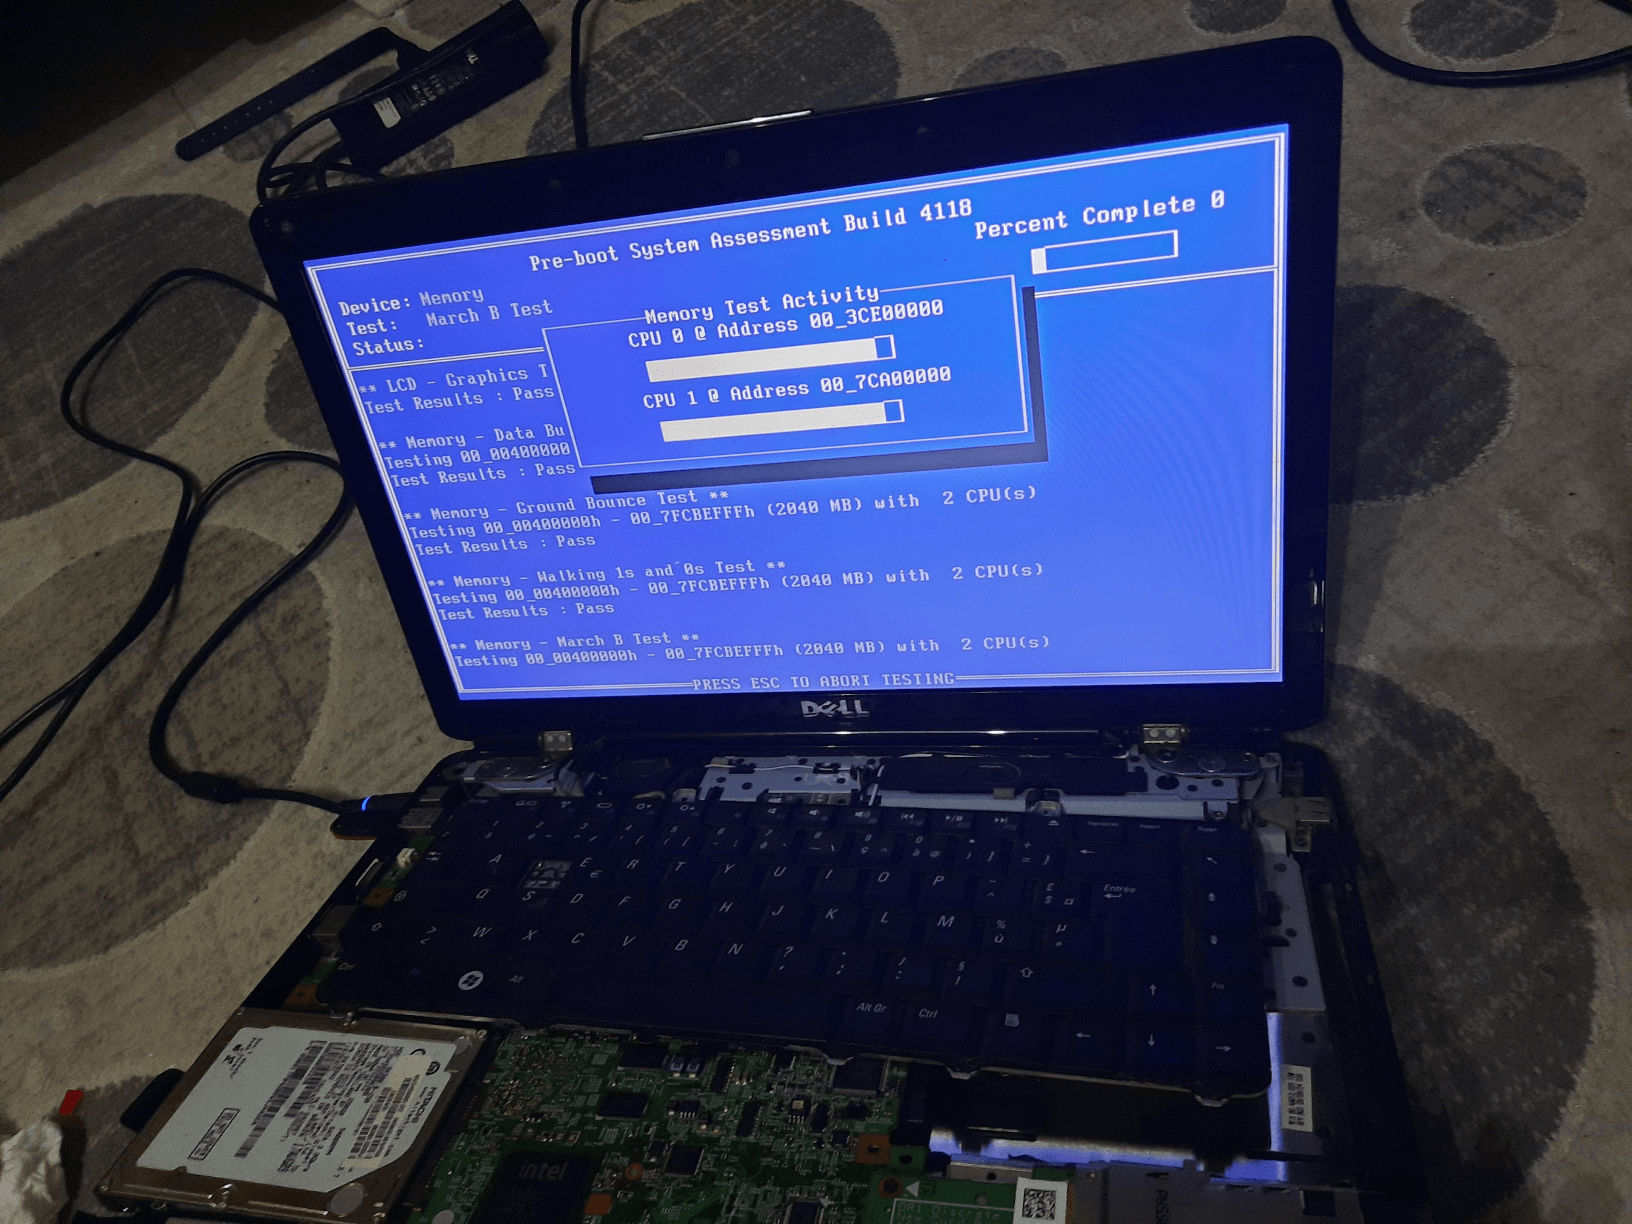 Wajdis latest project: reparing this computer